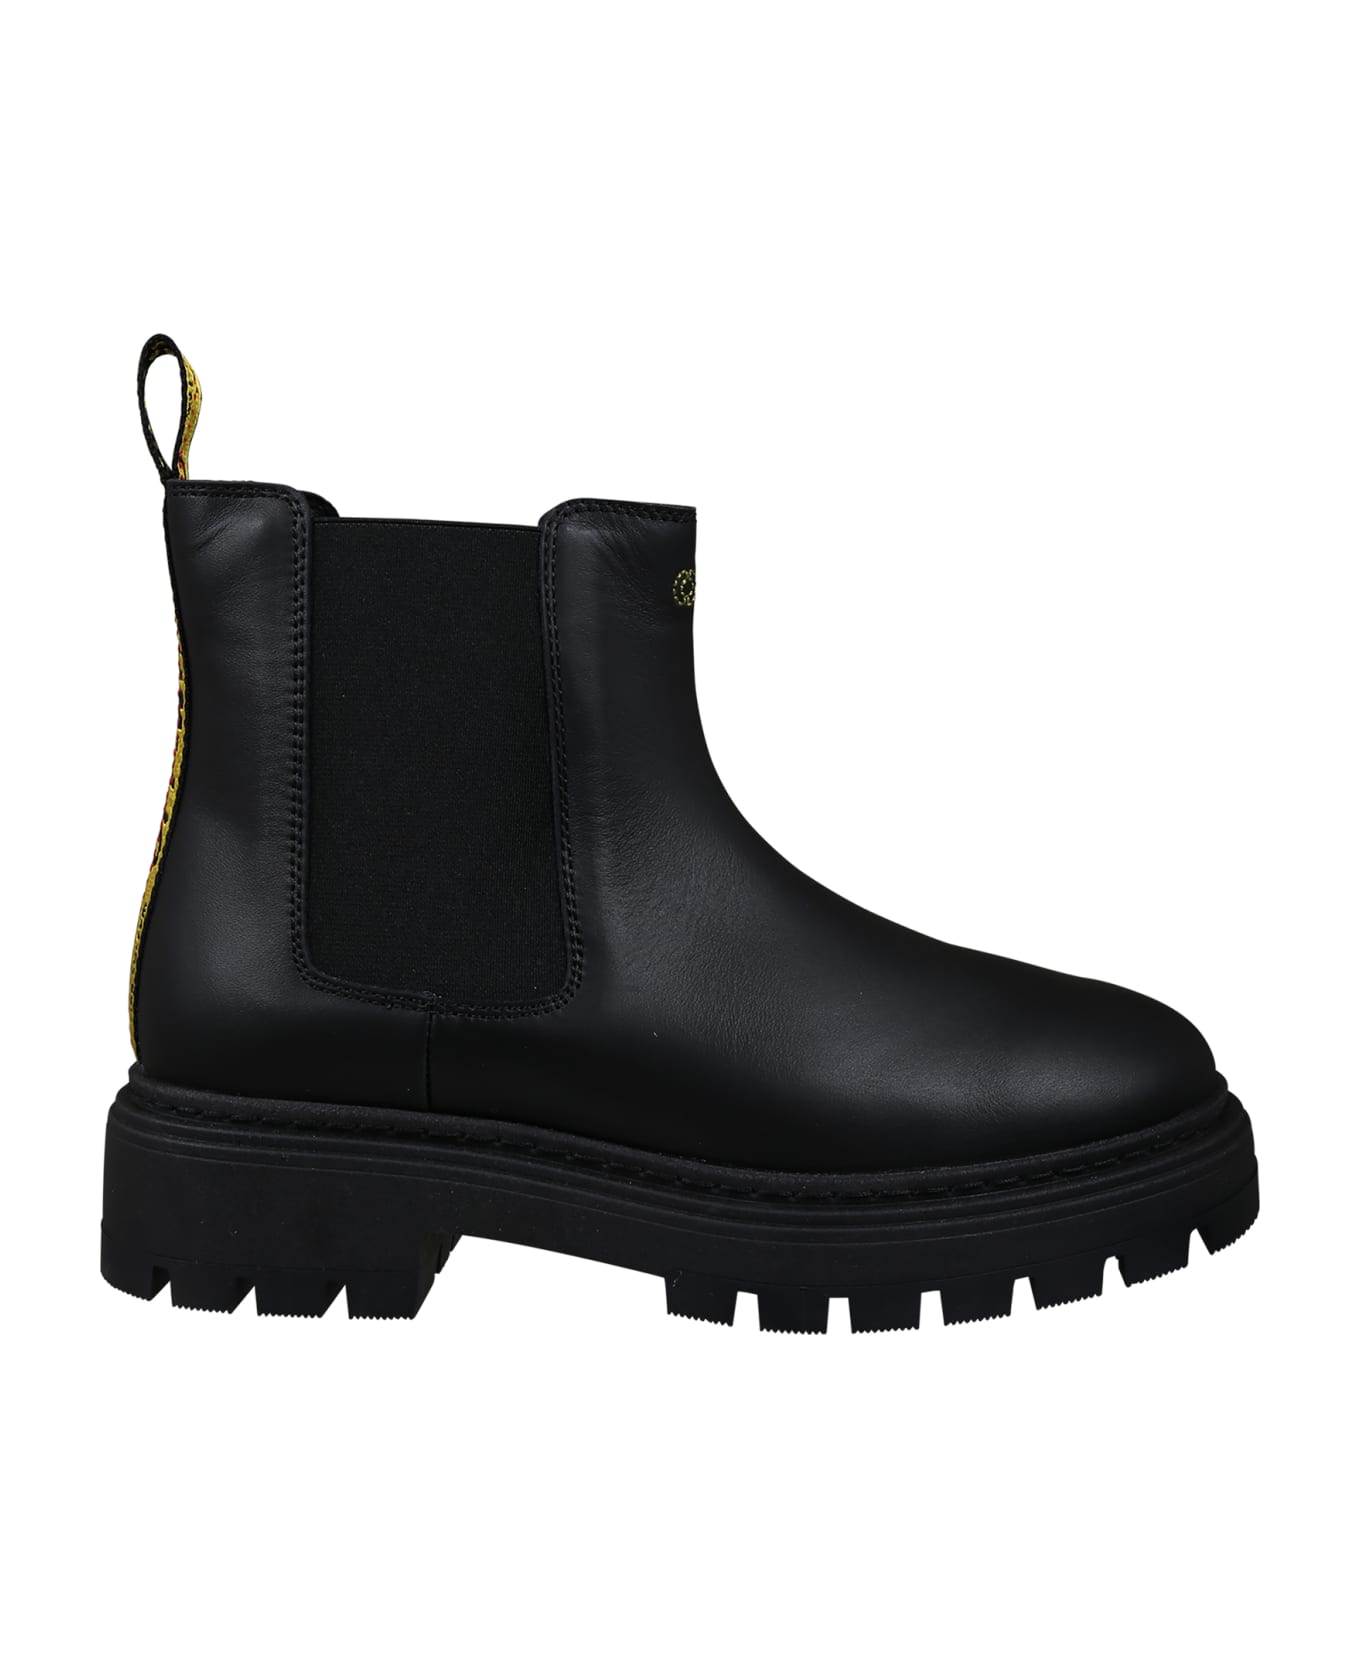 Off-White Black Ankle Boots For Kids With Logo - Black